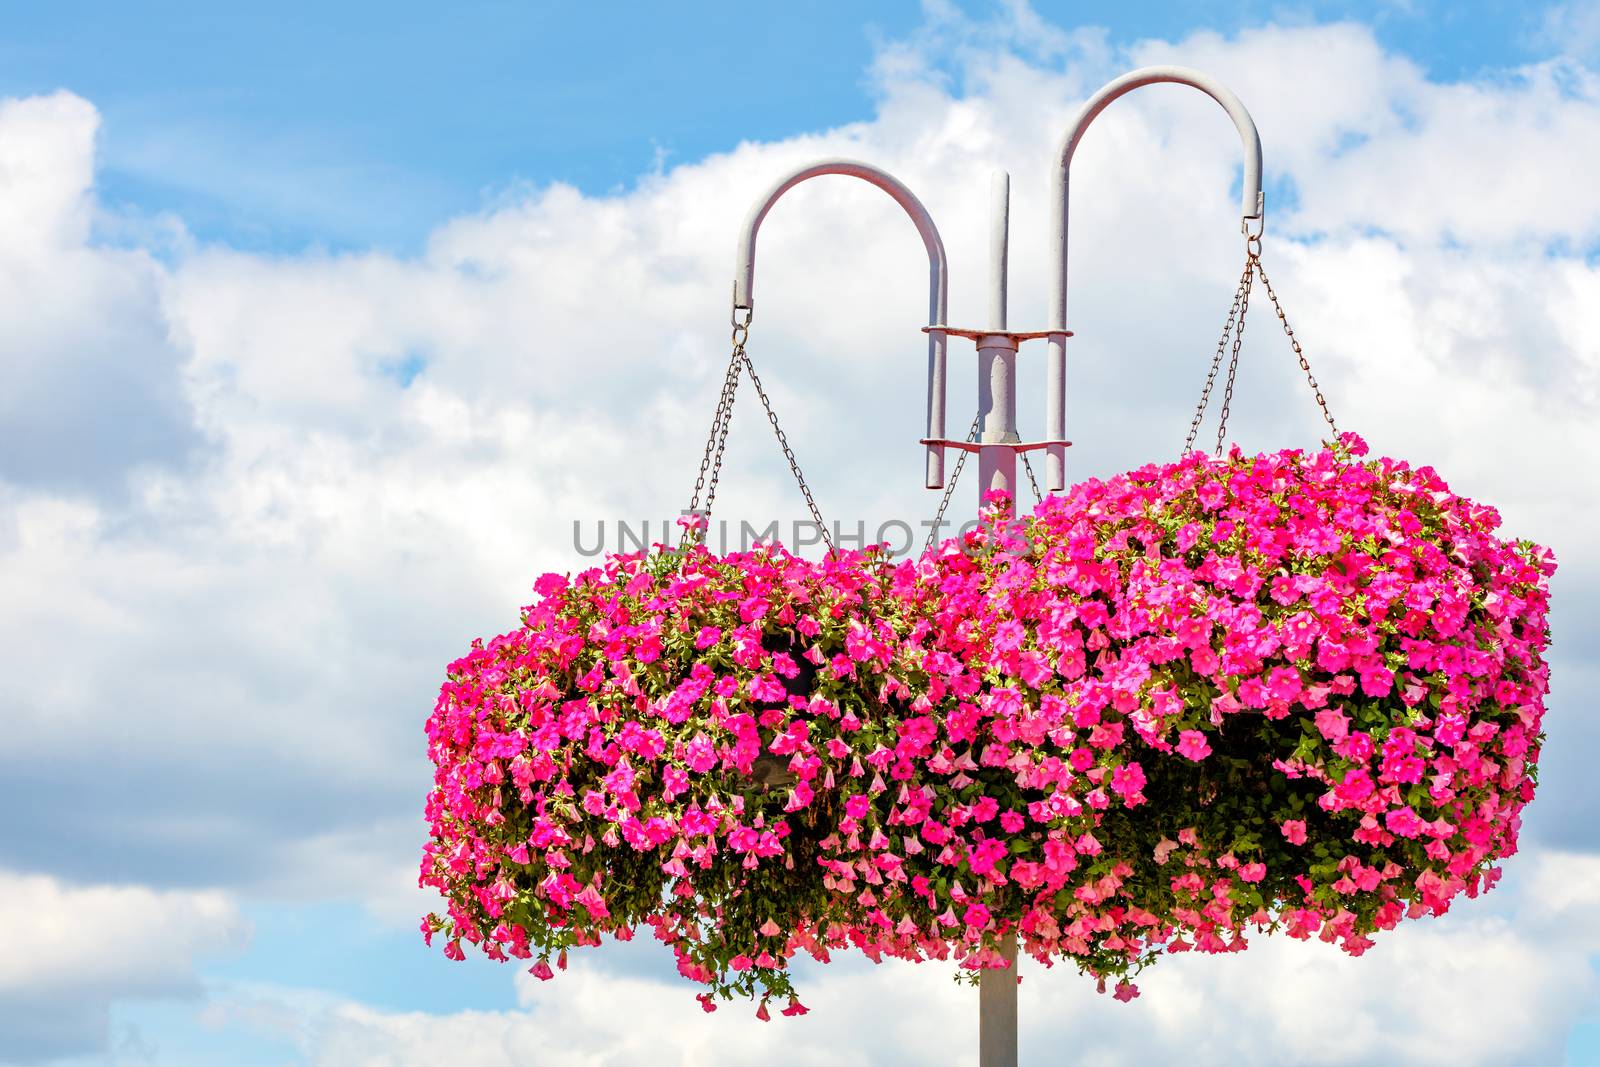 Outdoor flowerpots with pink and red petunias hang from a metal white pole against a blue cloudy sky, copy space.